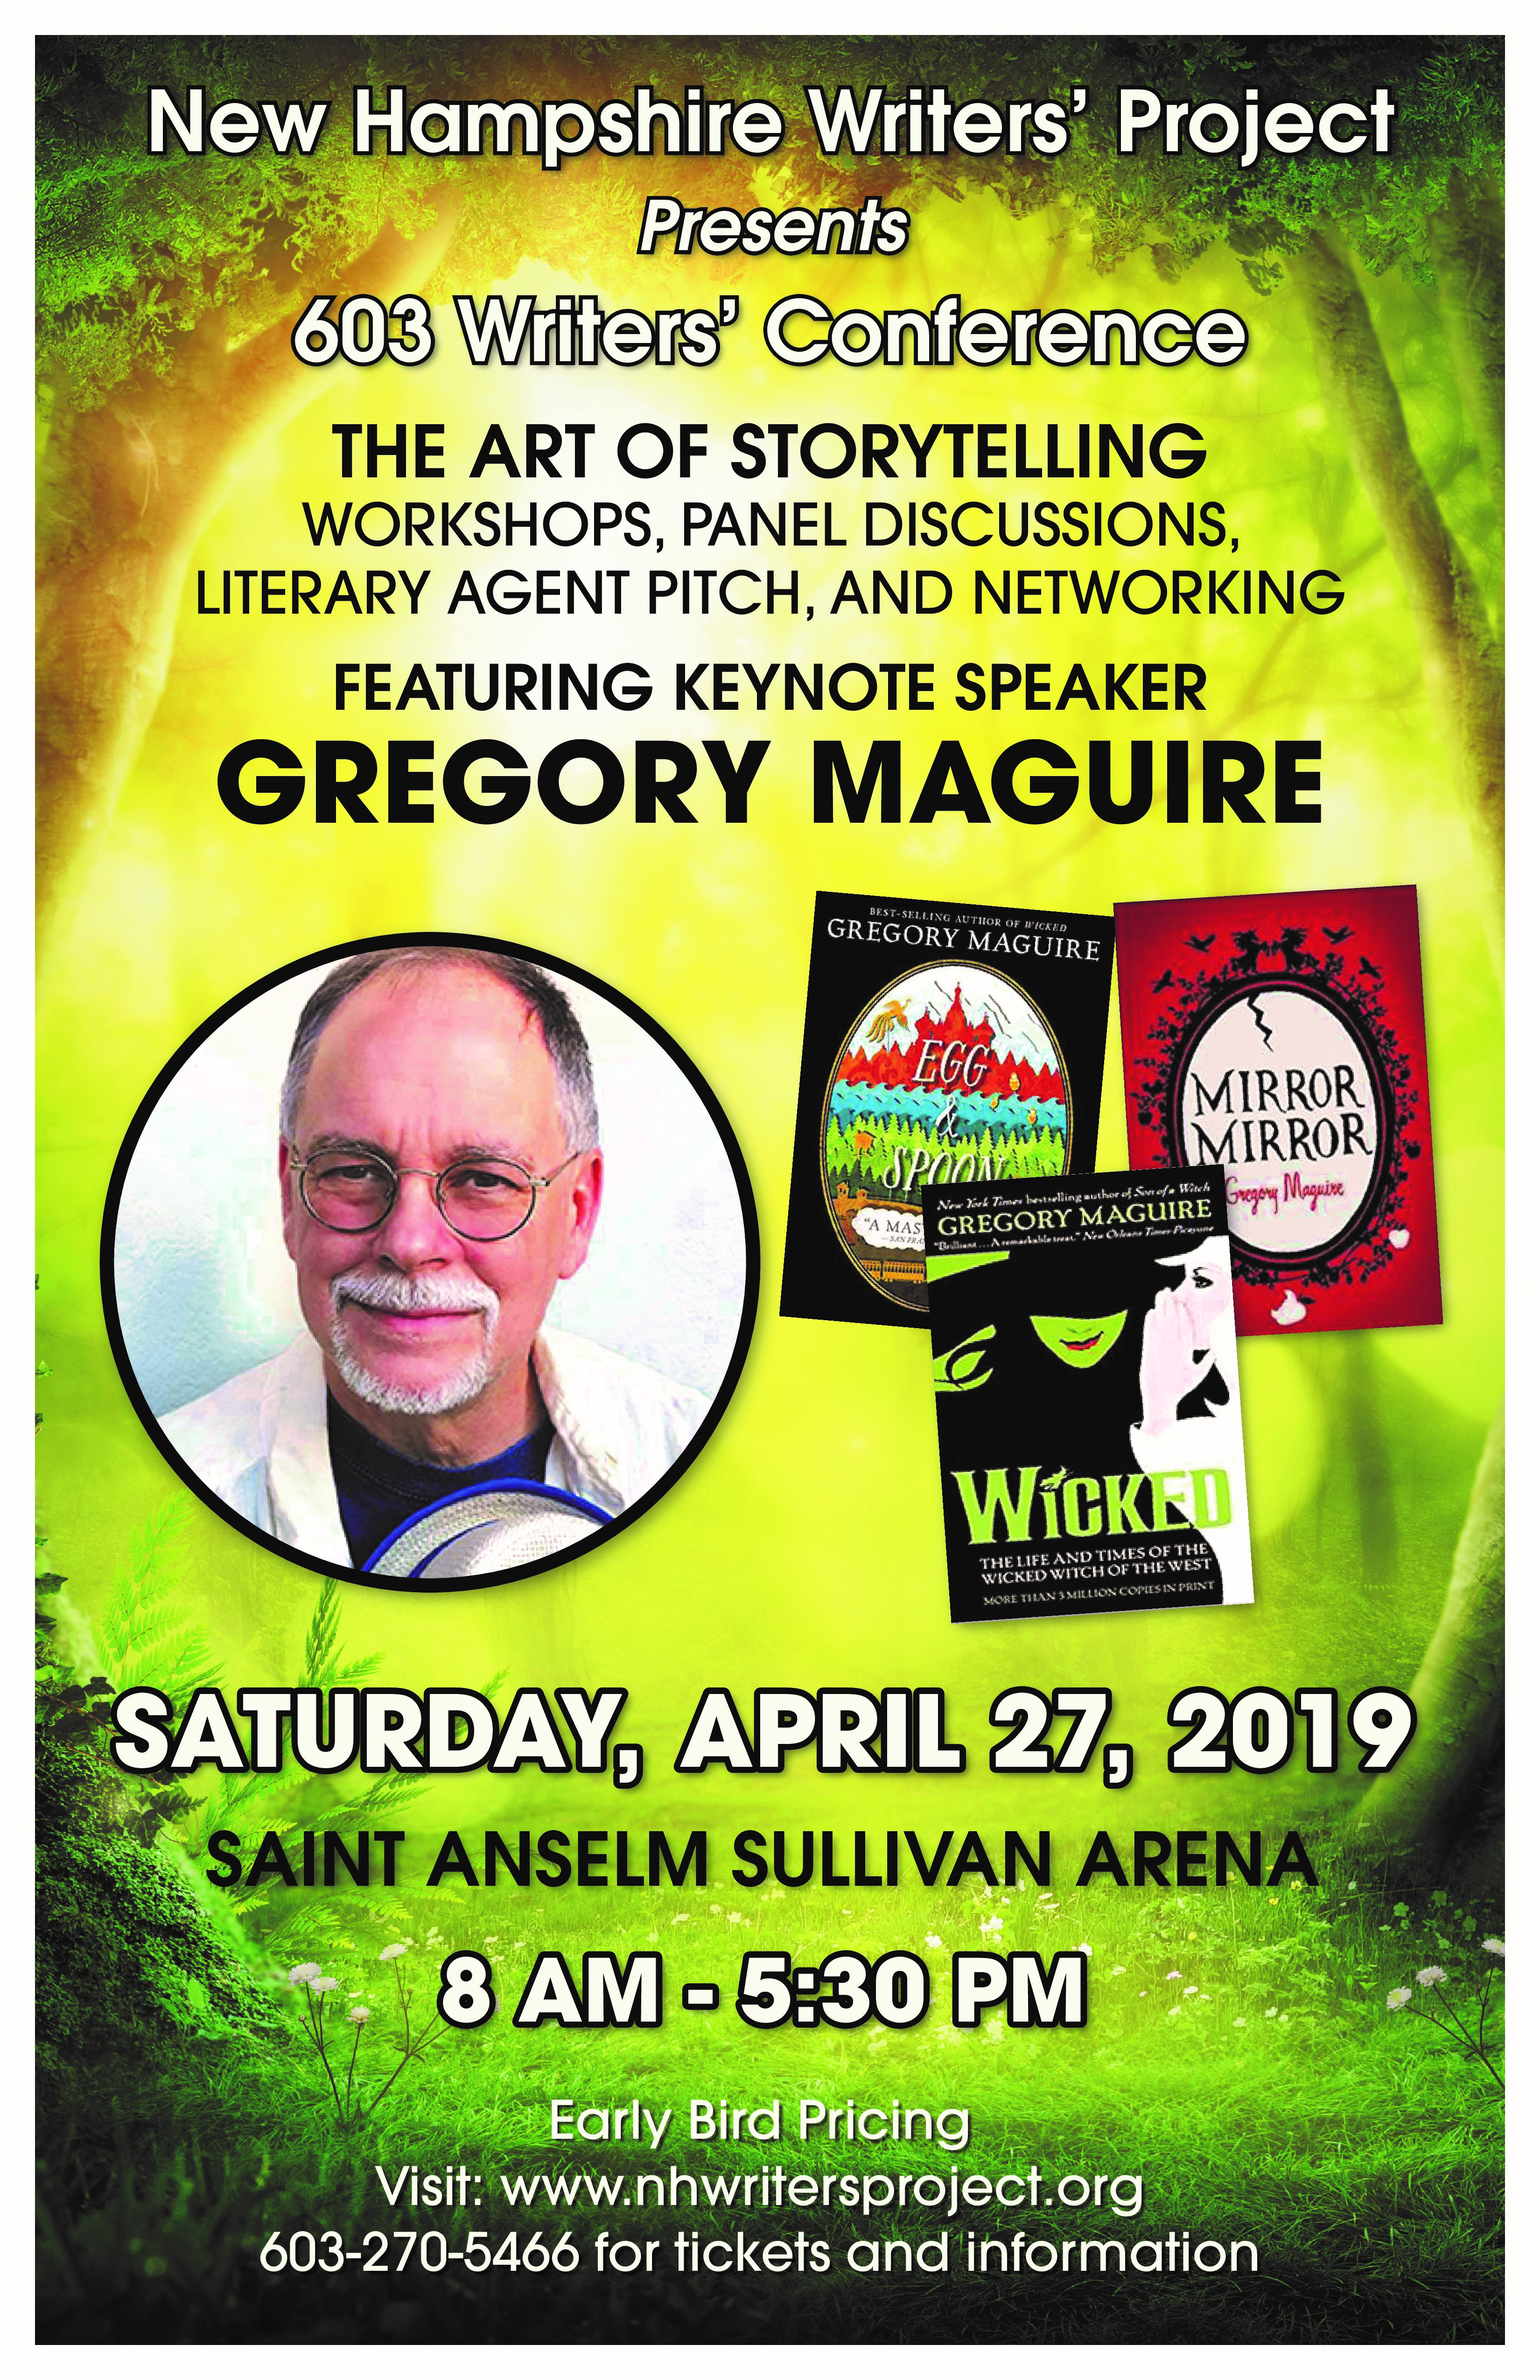 Celebrating over 30 years of supporting New Hampshire writers, the New Hampshire Writers’ Project presents 603: The Writers’ Conference, 8:00 a.m. to 5:30 p.m. on Saturday, April 27, 2019 at Saint Anselm College in Goffstown, NH.